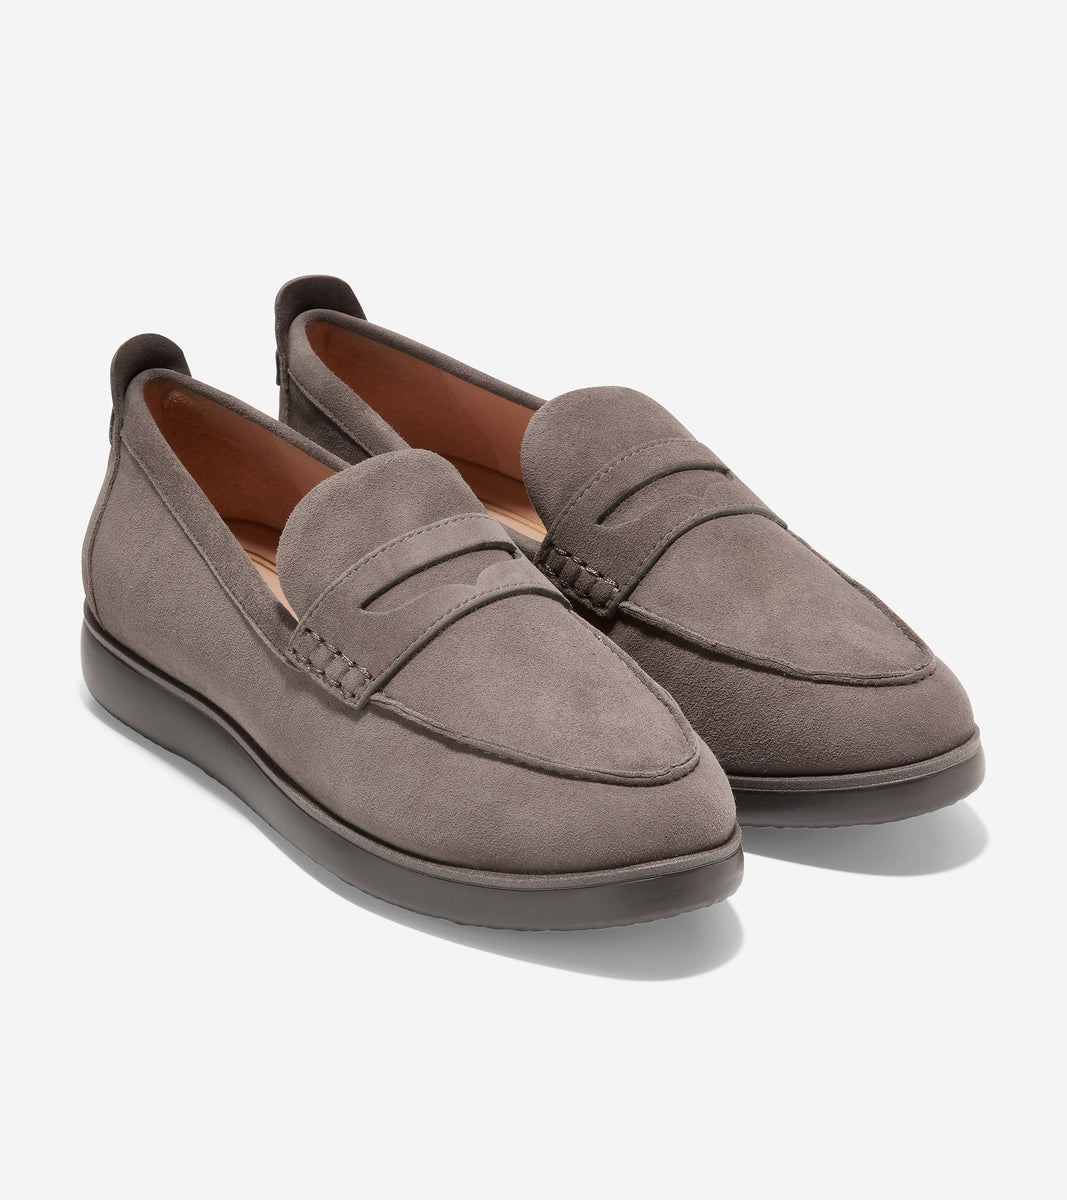 Women's Grand Ambition Tolly Penny Loafer